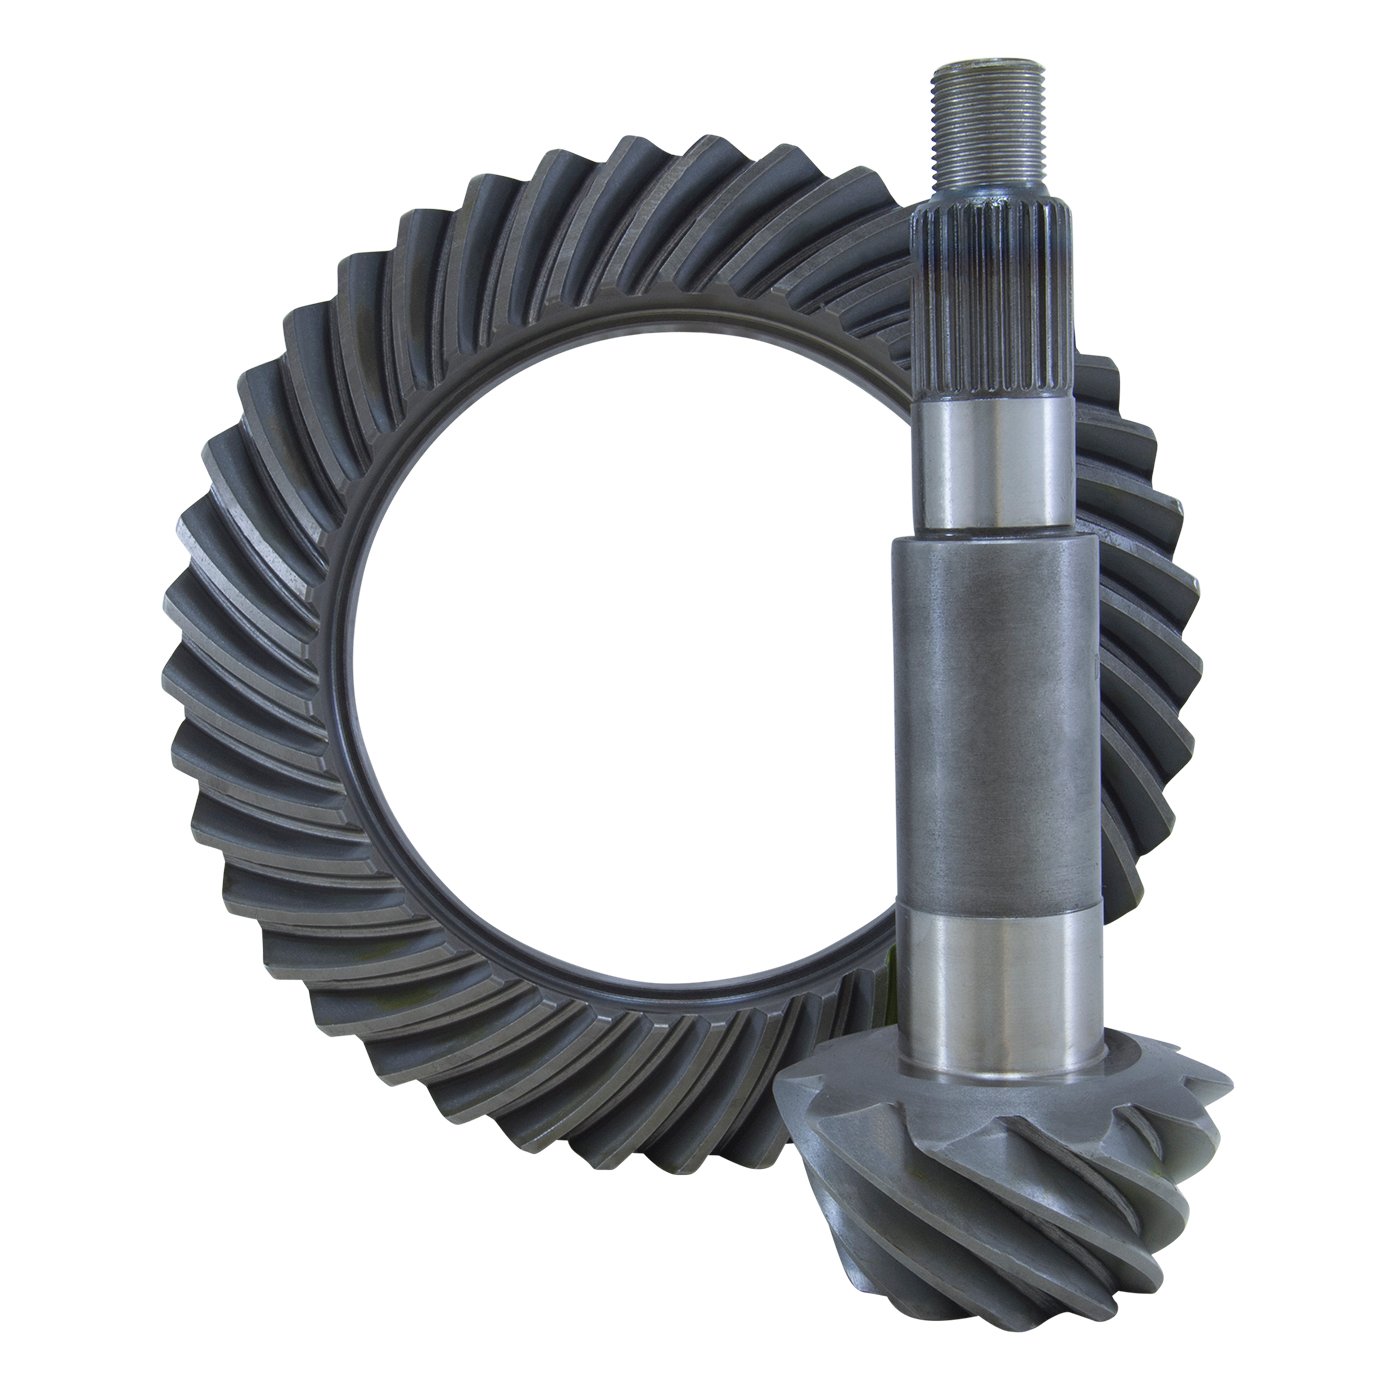 USA Standard ZG D60-513 Replacement Ring & Pinion Gear Set, For Dana 60, 5.13 Ratio